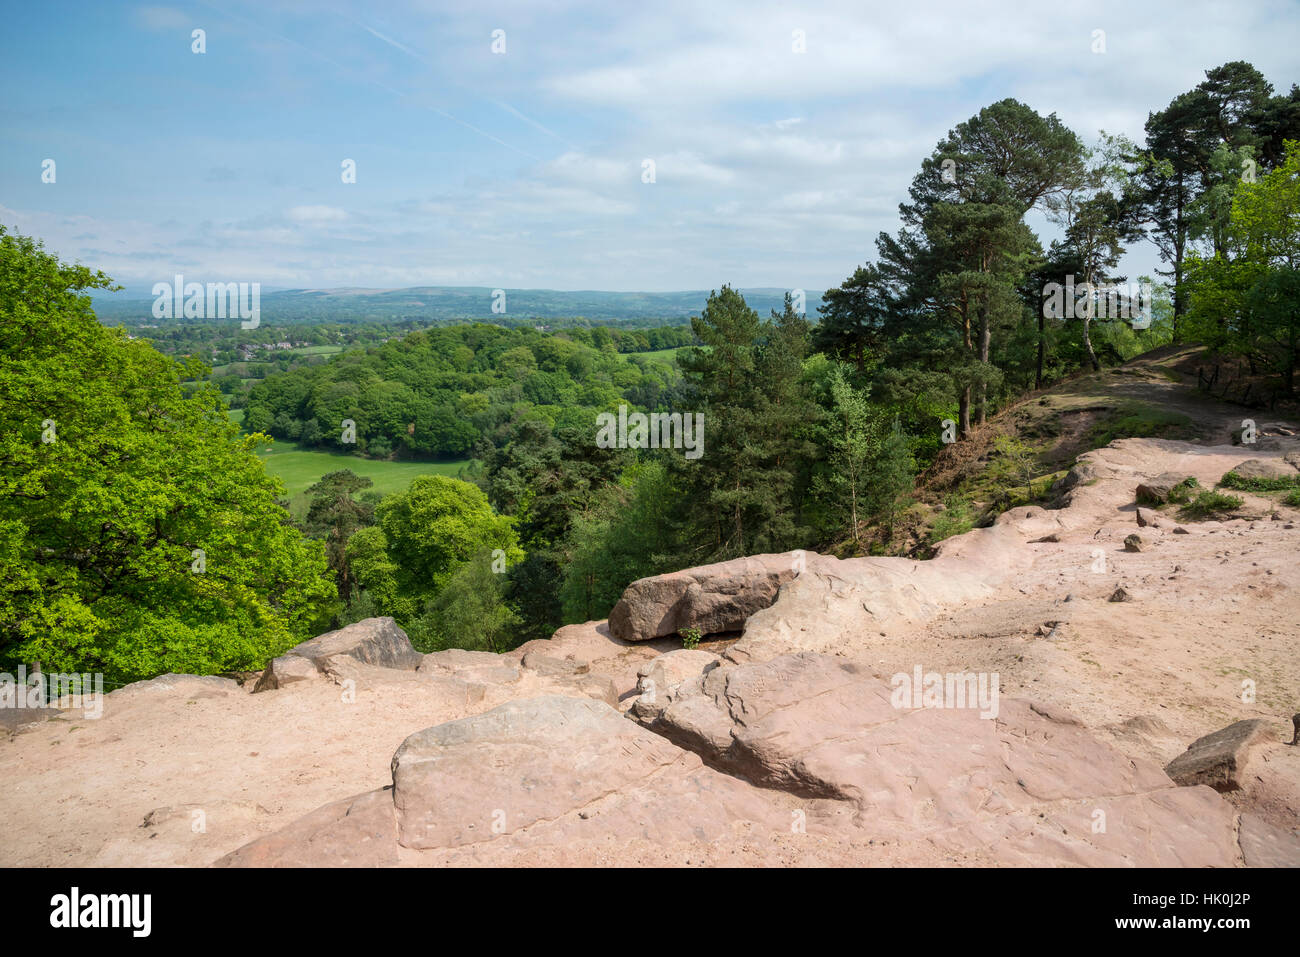 View of the Cheshire countryside from Stormy point, Alderley edge, Cheshire, England. Stock Photo